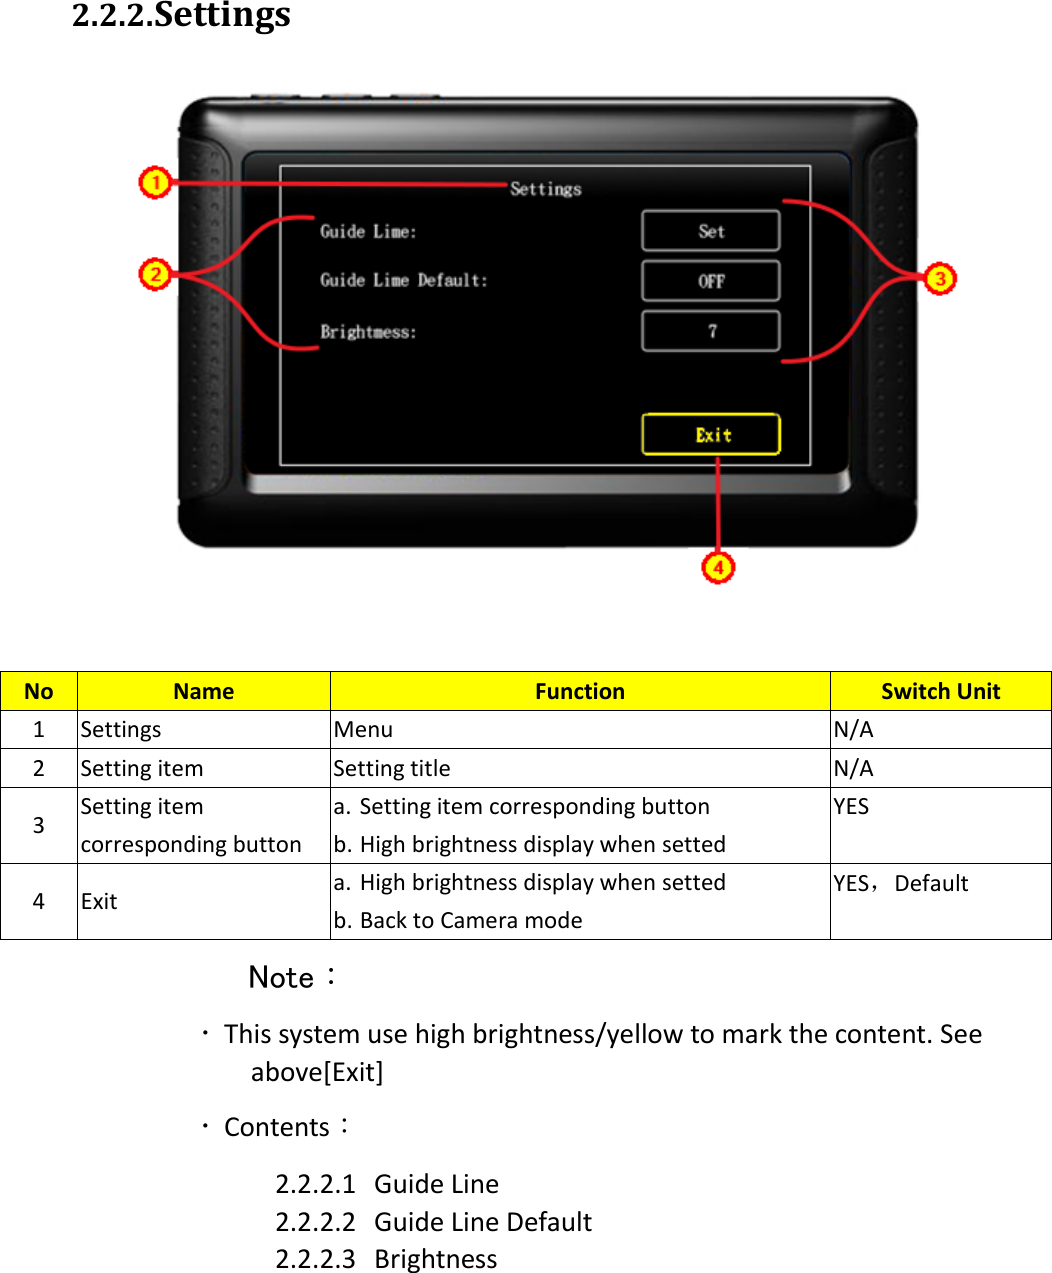  2.2.2. Settings   Note：  This system use high brightness/yellow to mark the content. See above[Exit]  Contents： 2.2.2.1 Guide Line 2.2.2.2 Guide Line Default 2.2.2.3 Brightness       No Name Function Switch Unit 1 Settings Menu N/A 2 Setting item Setting title N/A 3 Setting item corresponding button   a. Setting item corresponding button   b. High brightness display when setted YES 4 Exit a. High brightness display when setted b. Back to Camera mode YES，Default 